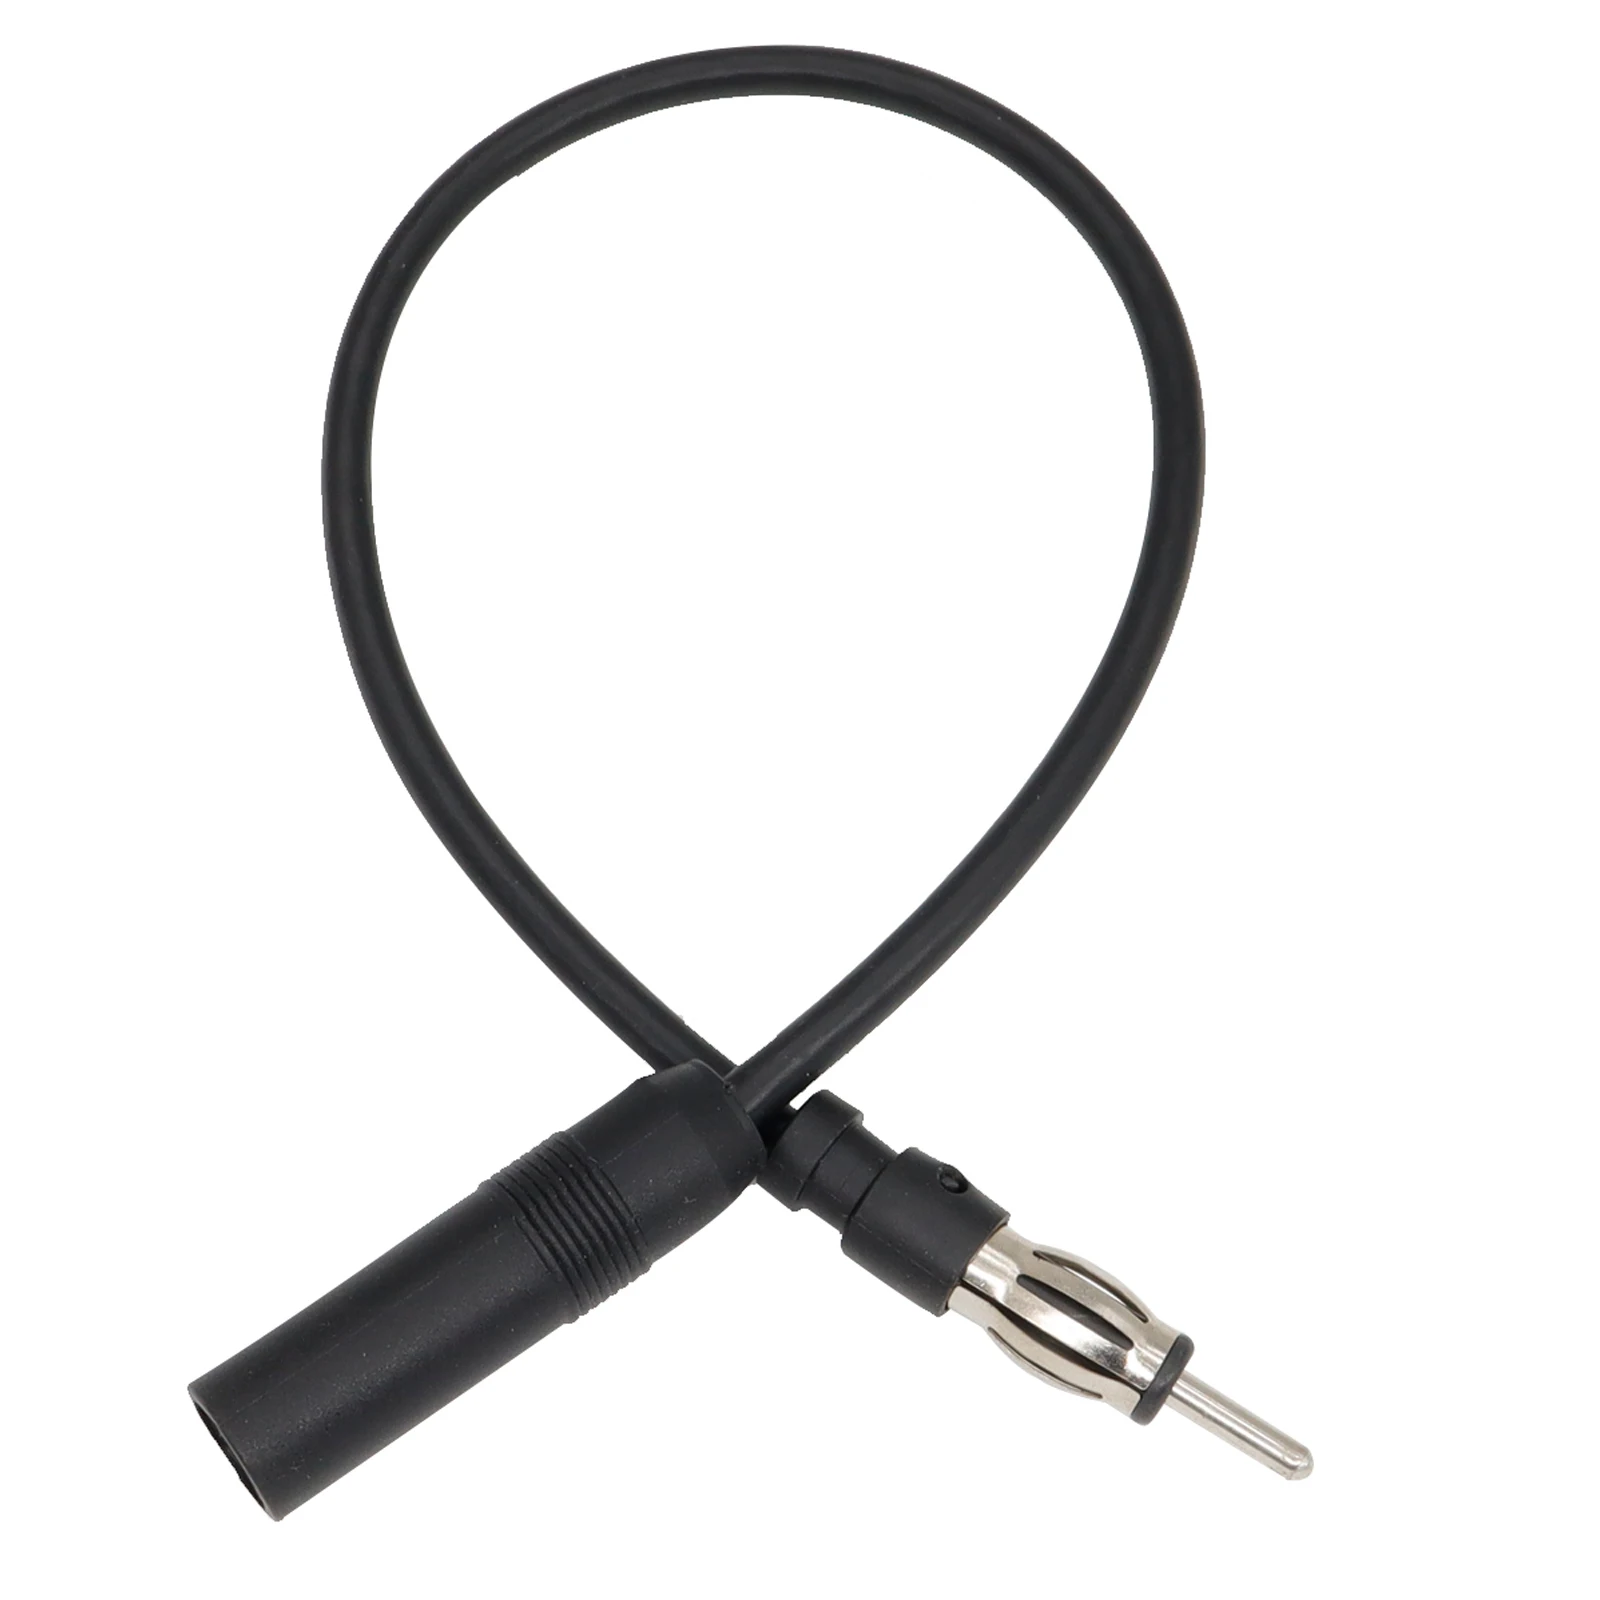 Car Radio Antenna Extension Cable 35cm - Universal Plug &amp; Play Coaxial Cord - $13.21